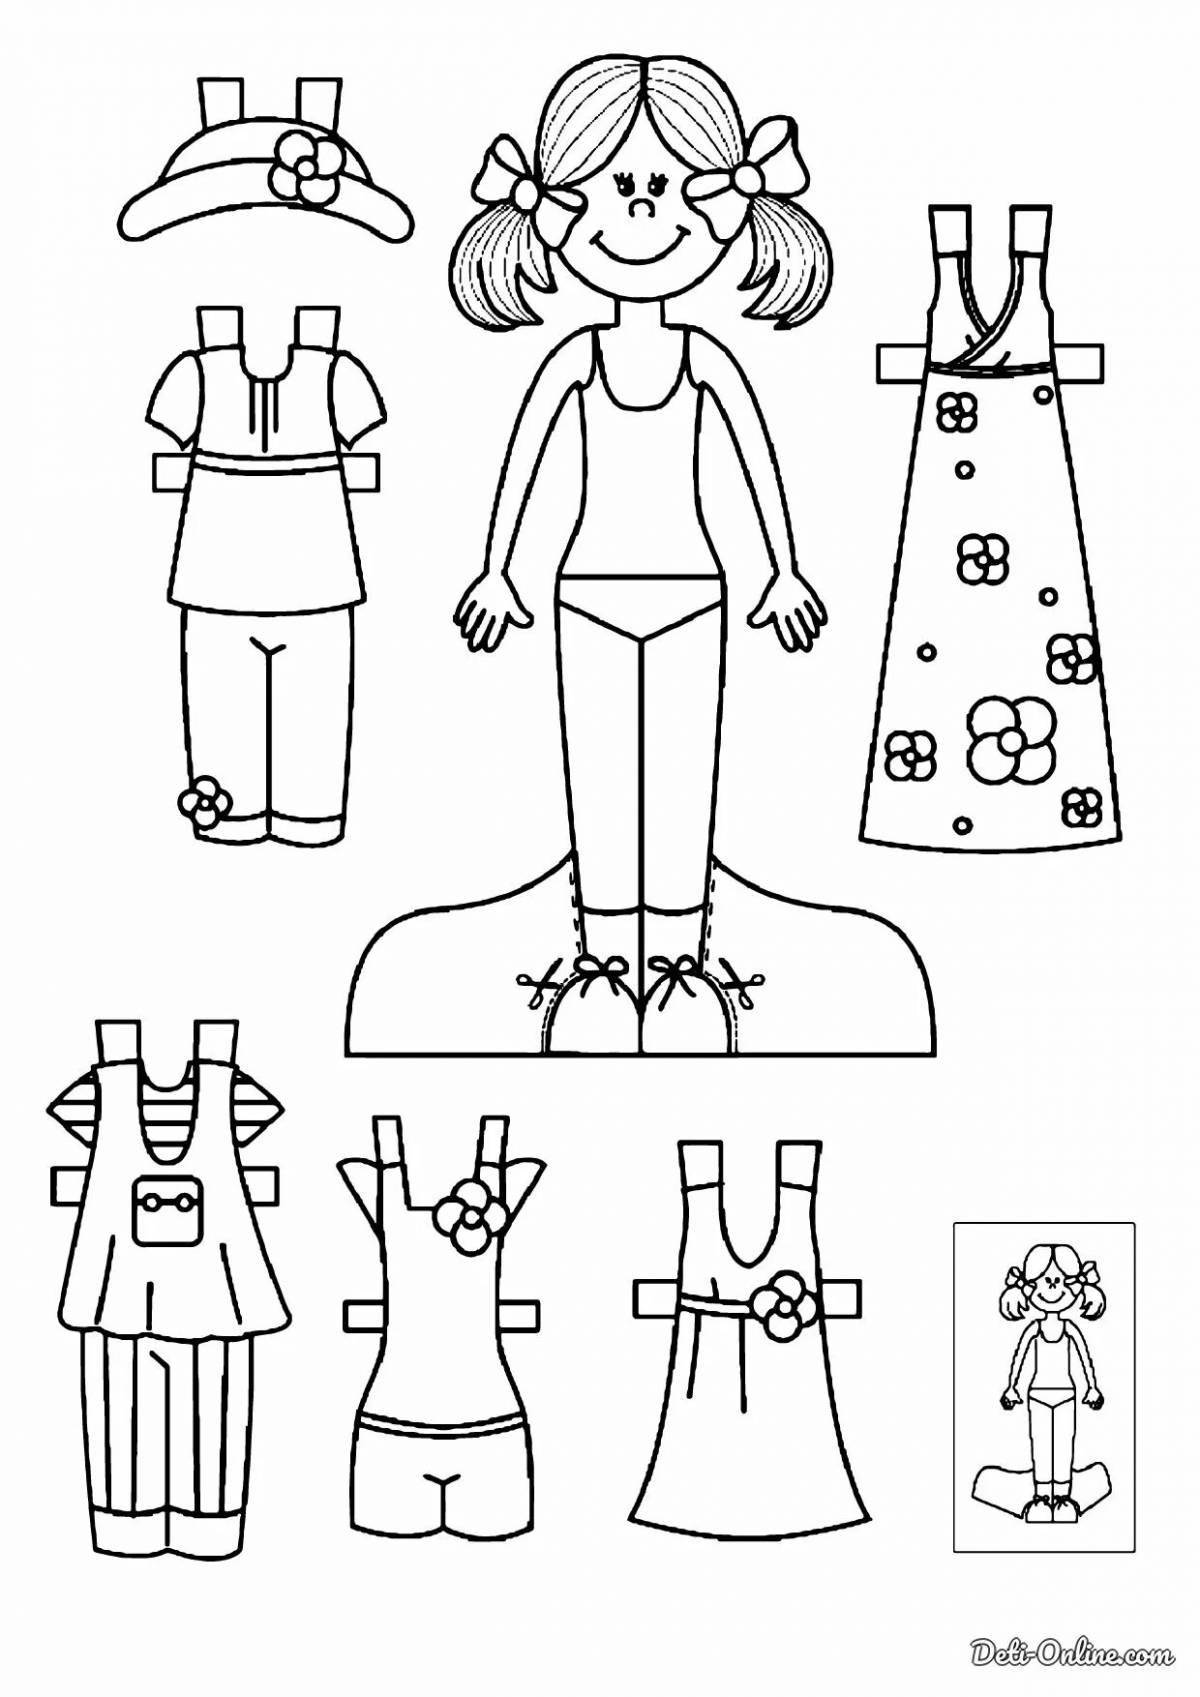 Royal coloring doll in dress